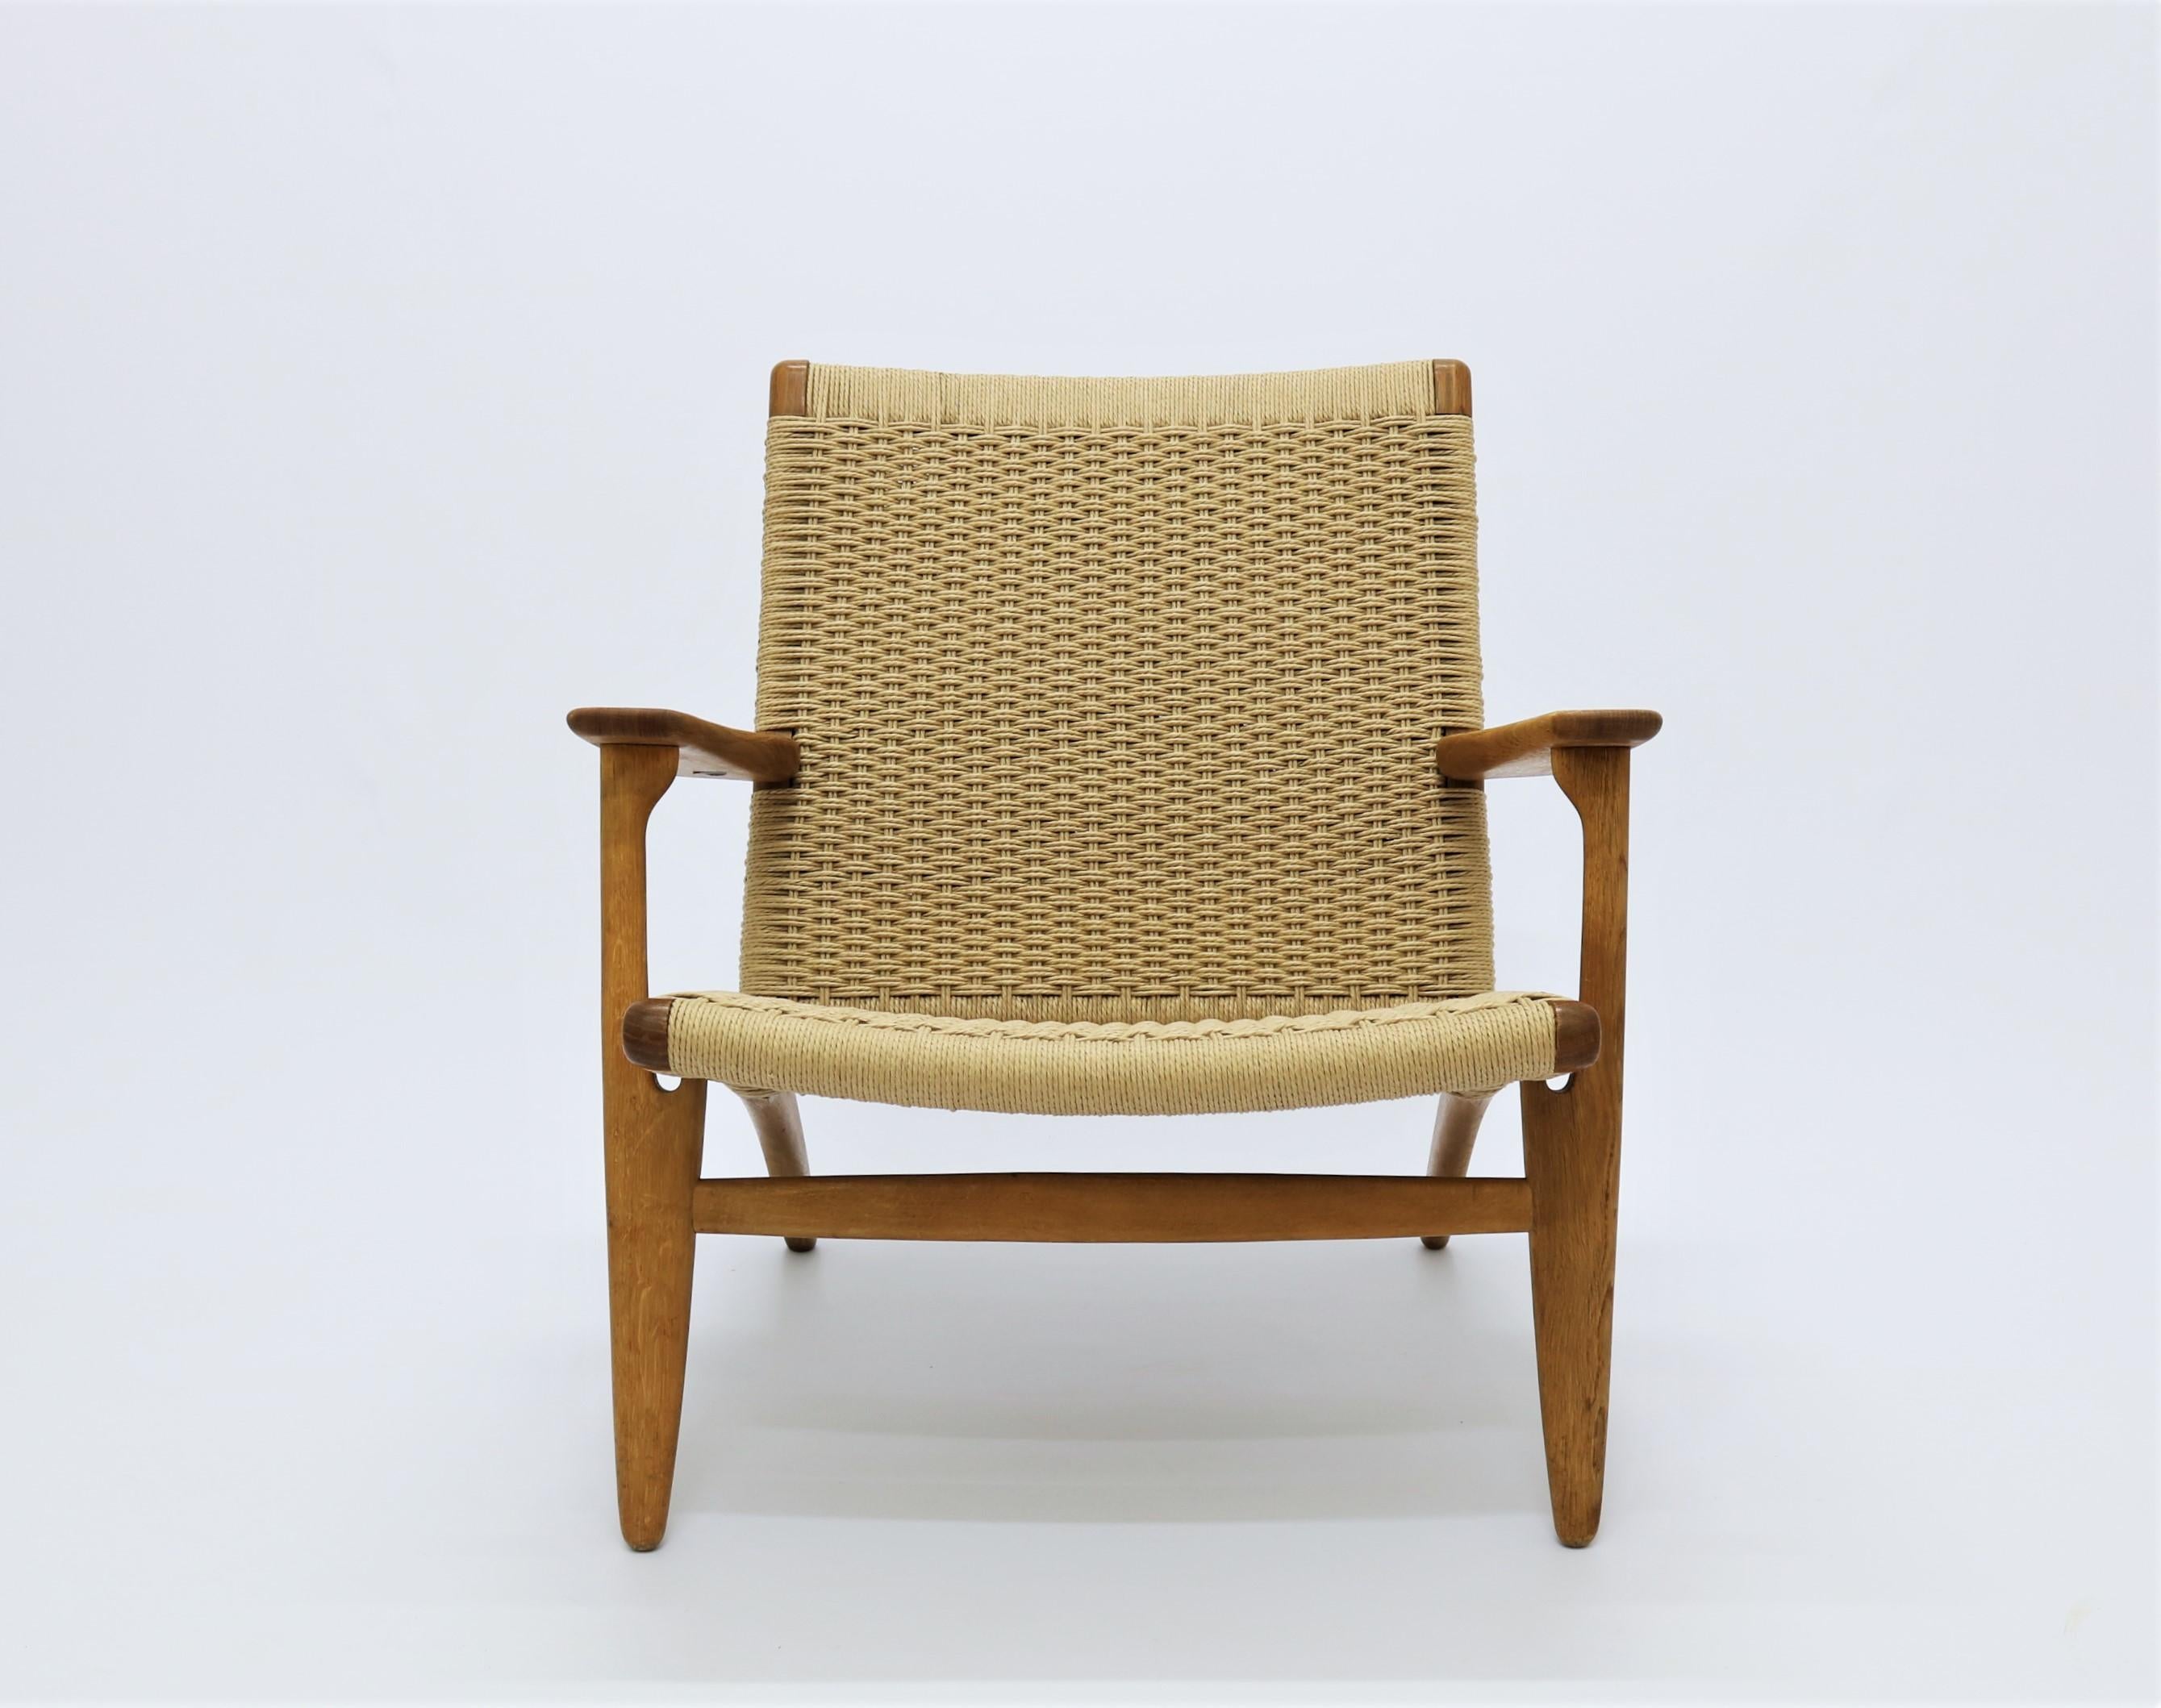 Beautiful vintage lounge chair model CH-25 by Danish Designer Hans J. Wegner for Carl Hansen & Son. This is a model from the very early production of the chair which and it has a perfect patina to the wood. It has been refinished with all new paper